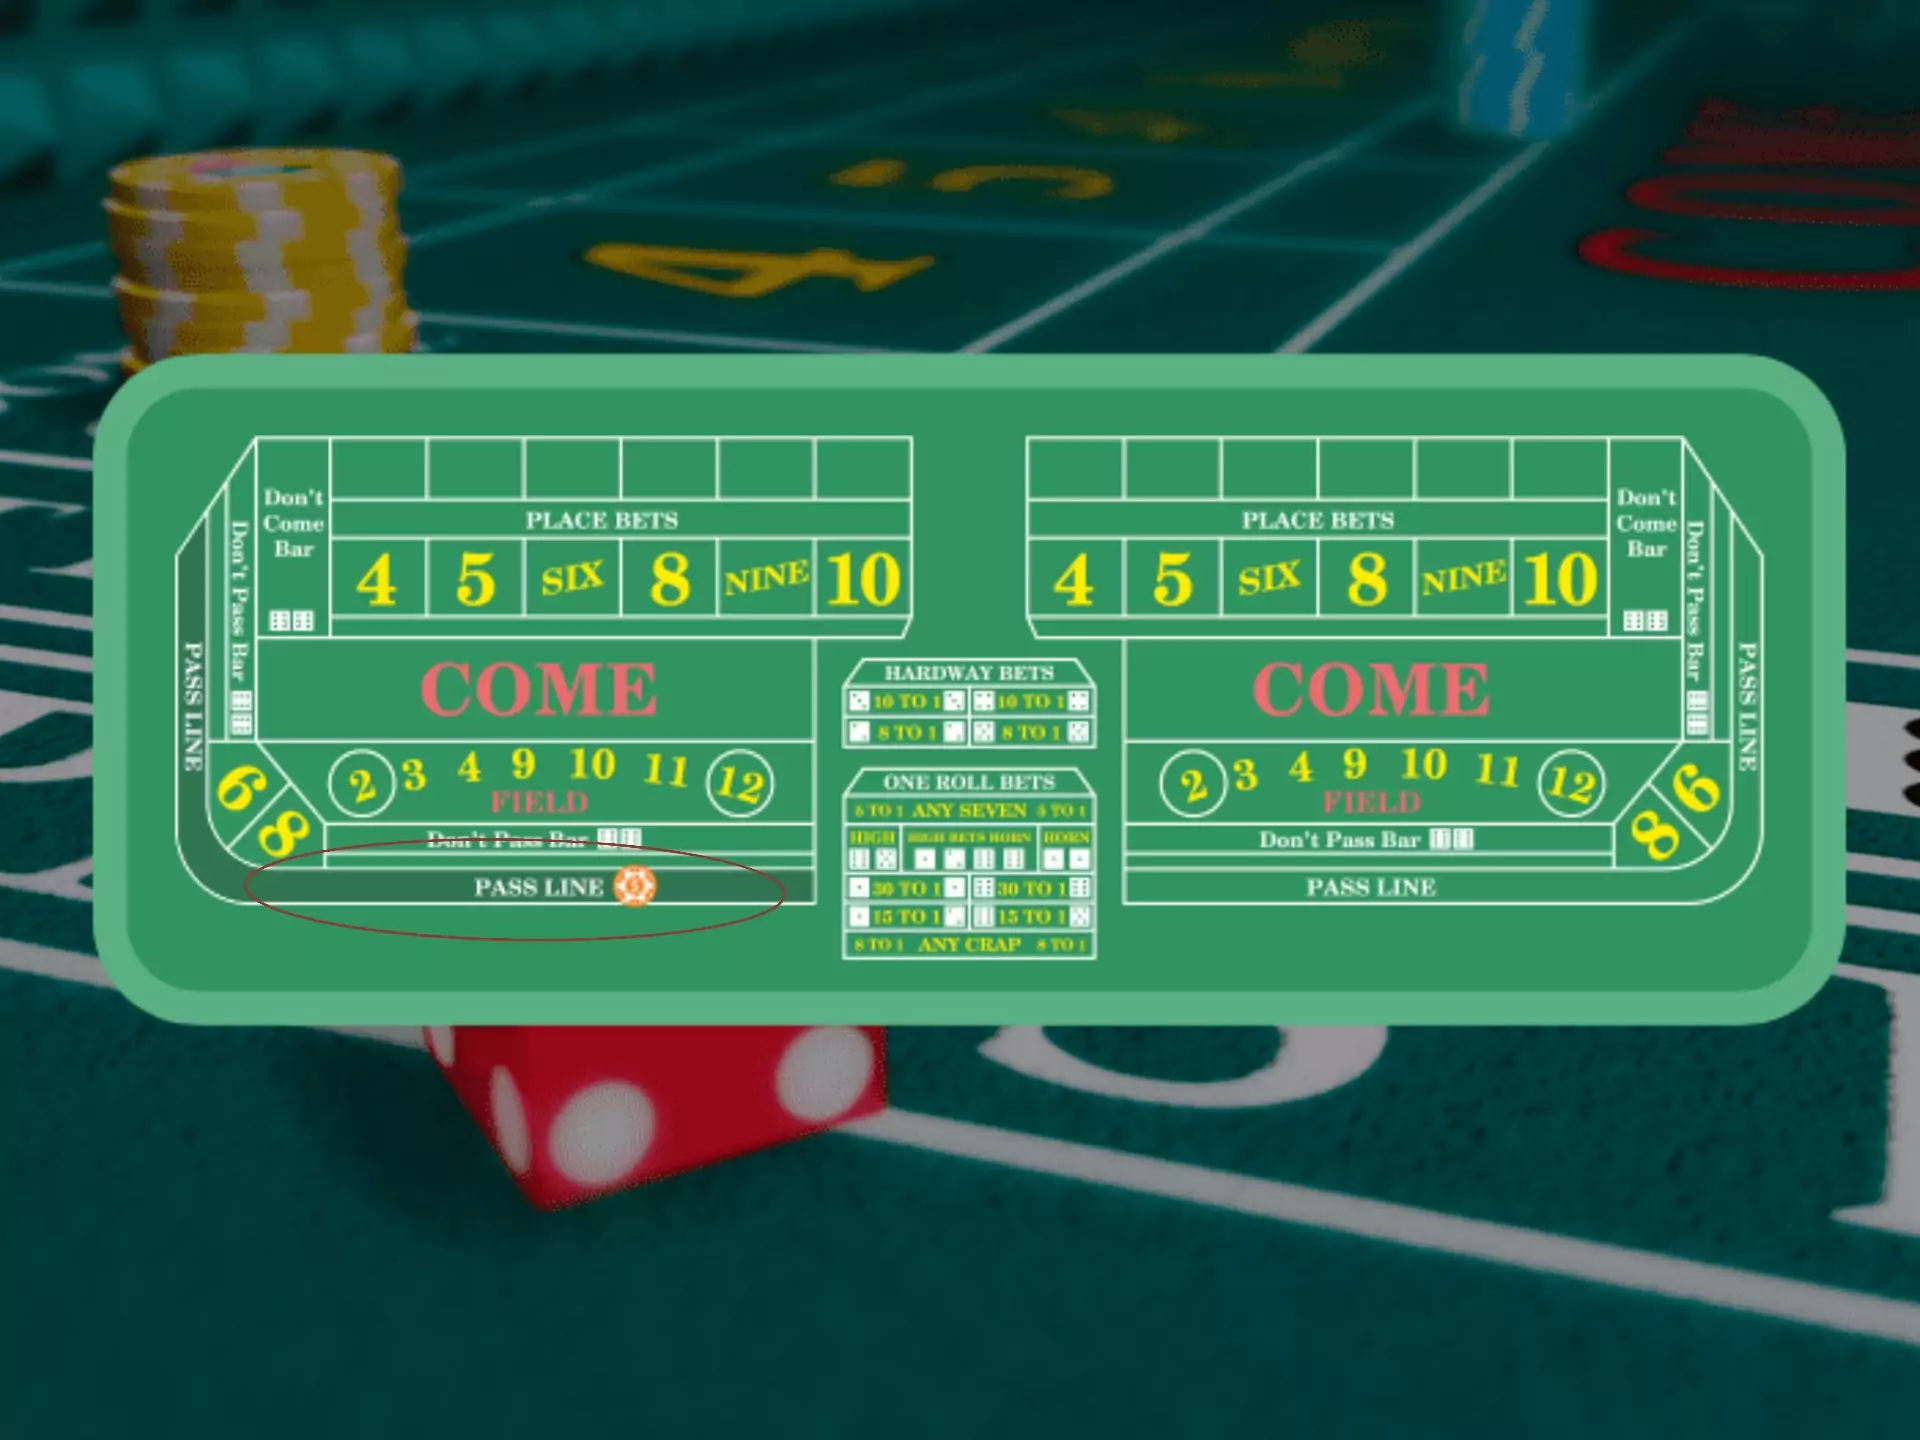 Line bets are the easiest for online casino newcomers.